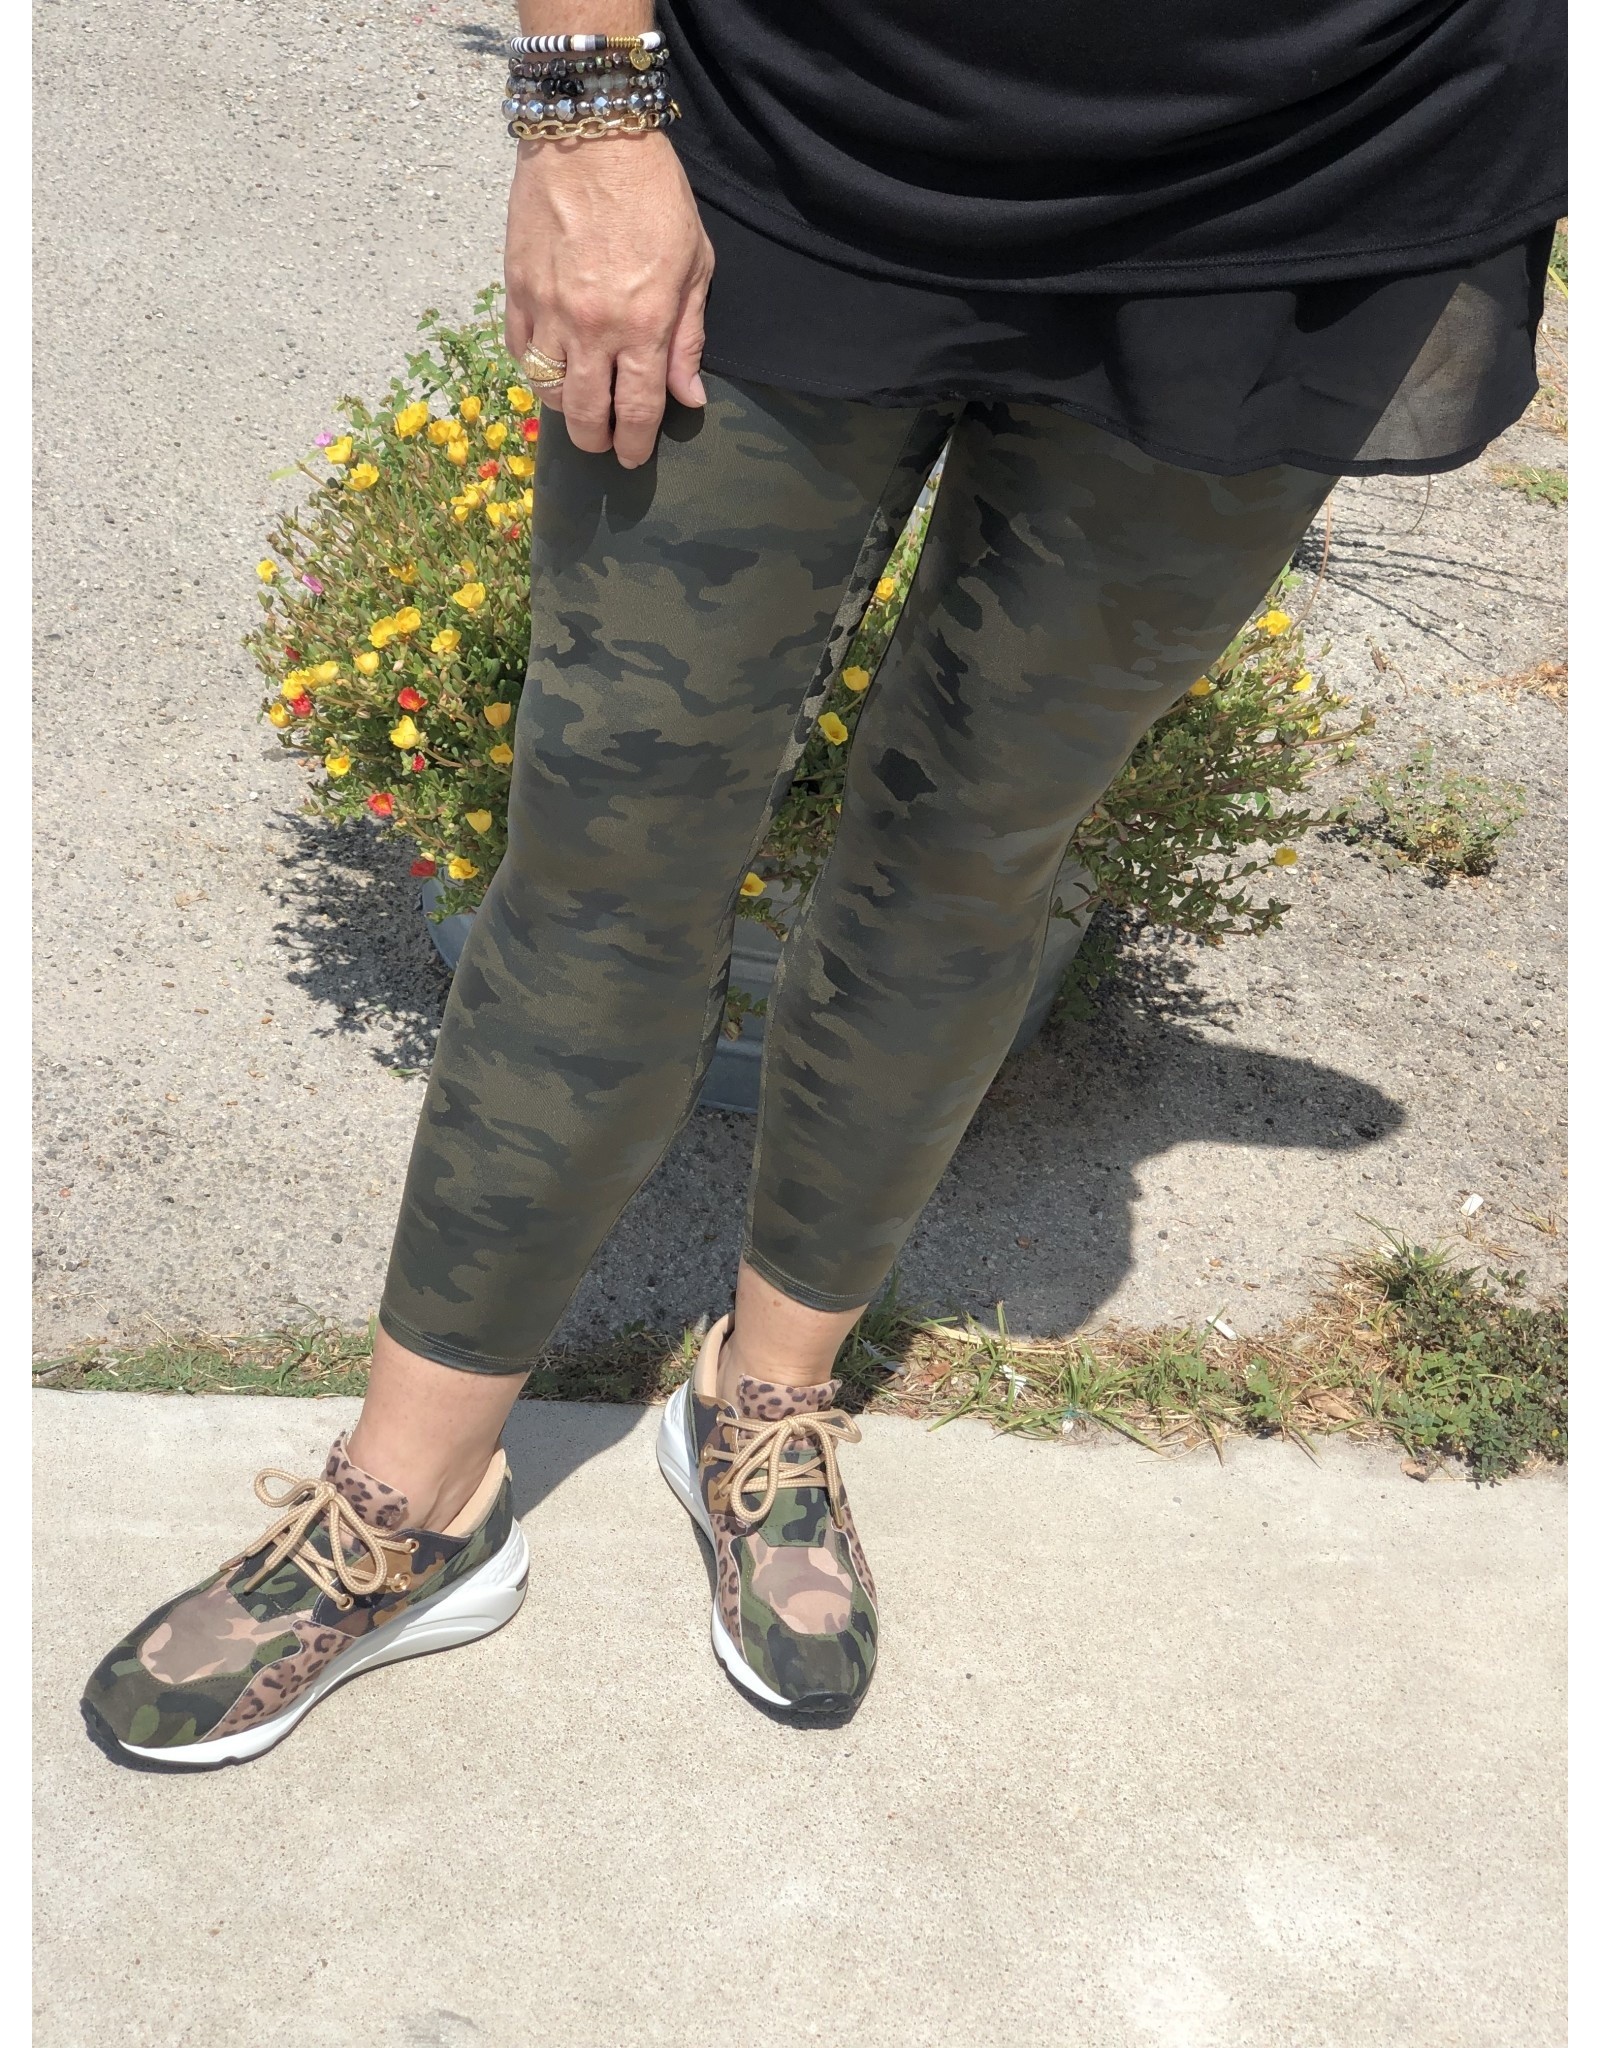 Spanx Camo Leggings Multiple Size M - $26 (61% Off Retail) New With Tags -  From Hannah